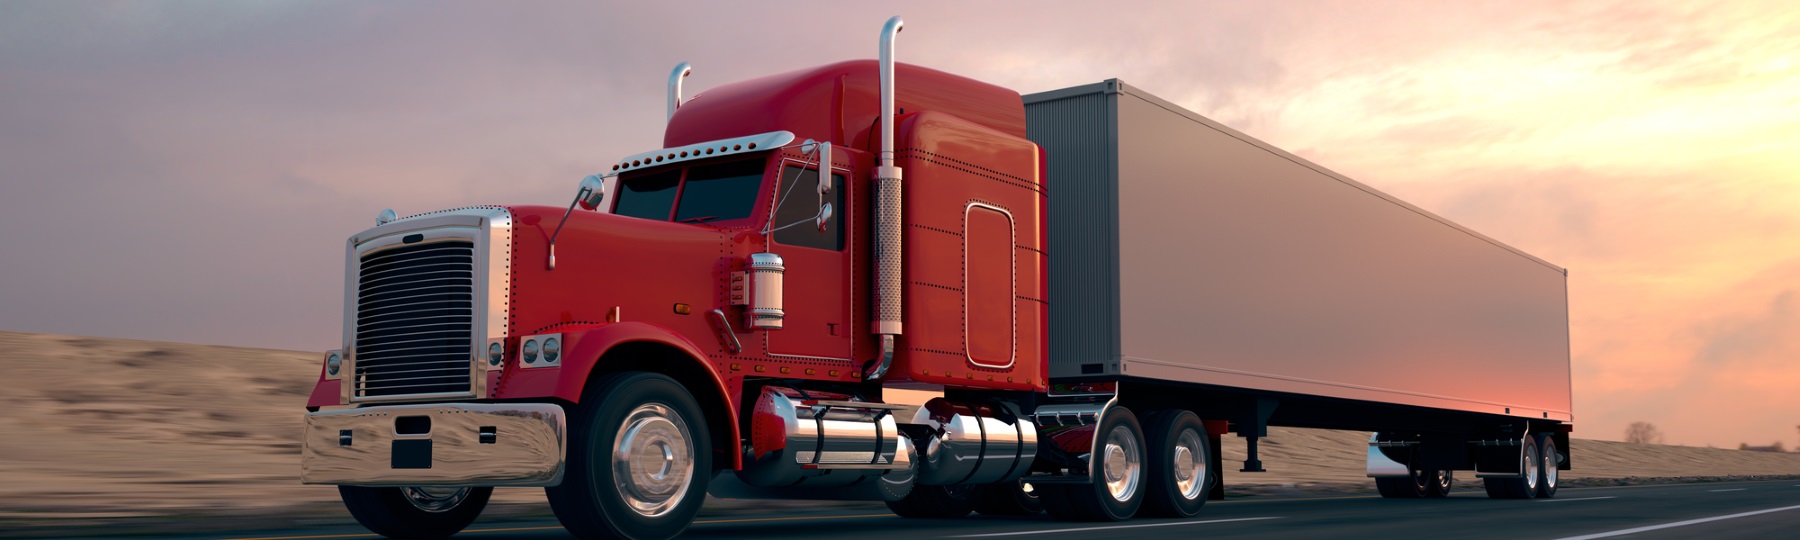 Red truck for trucking insurance